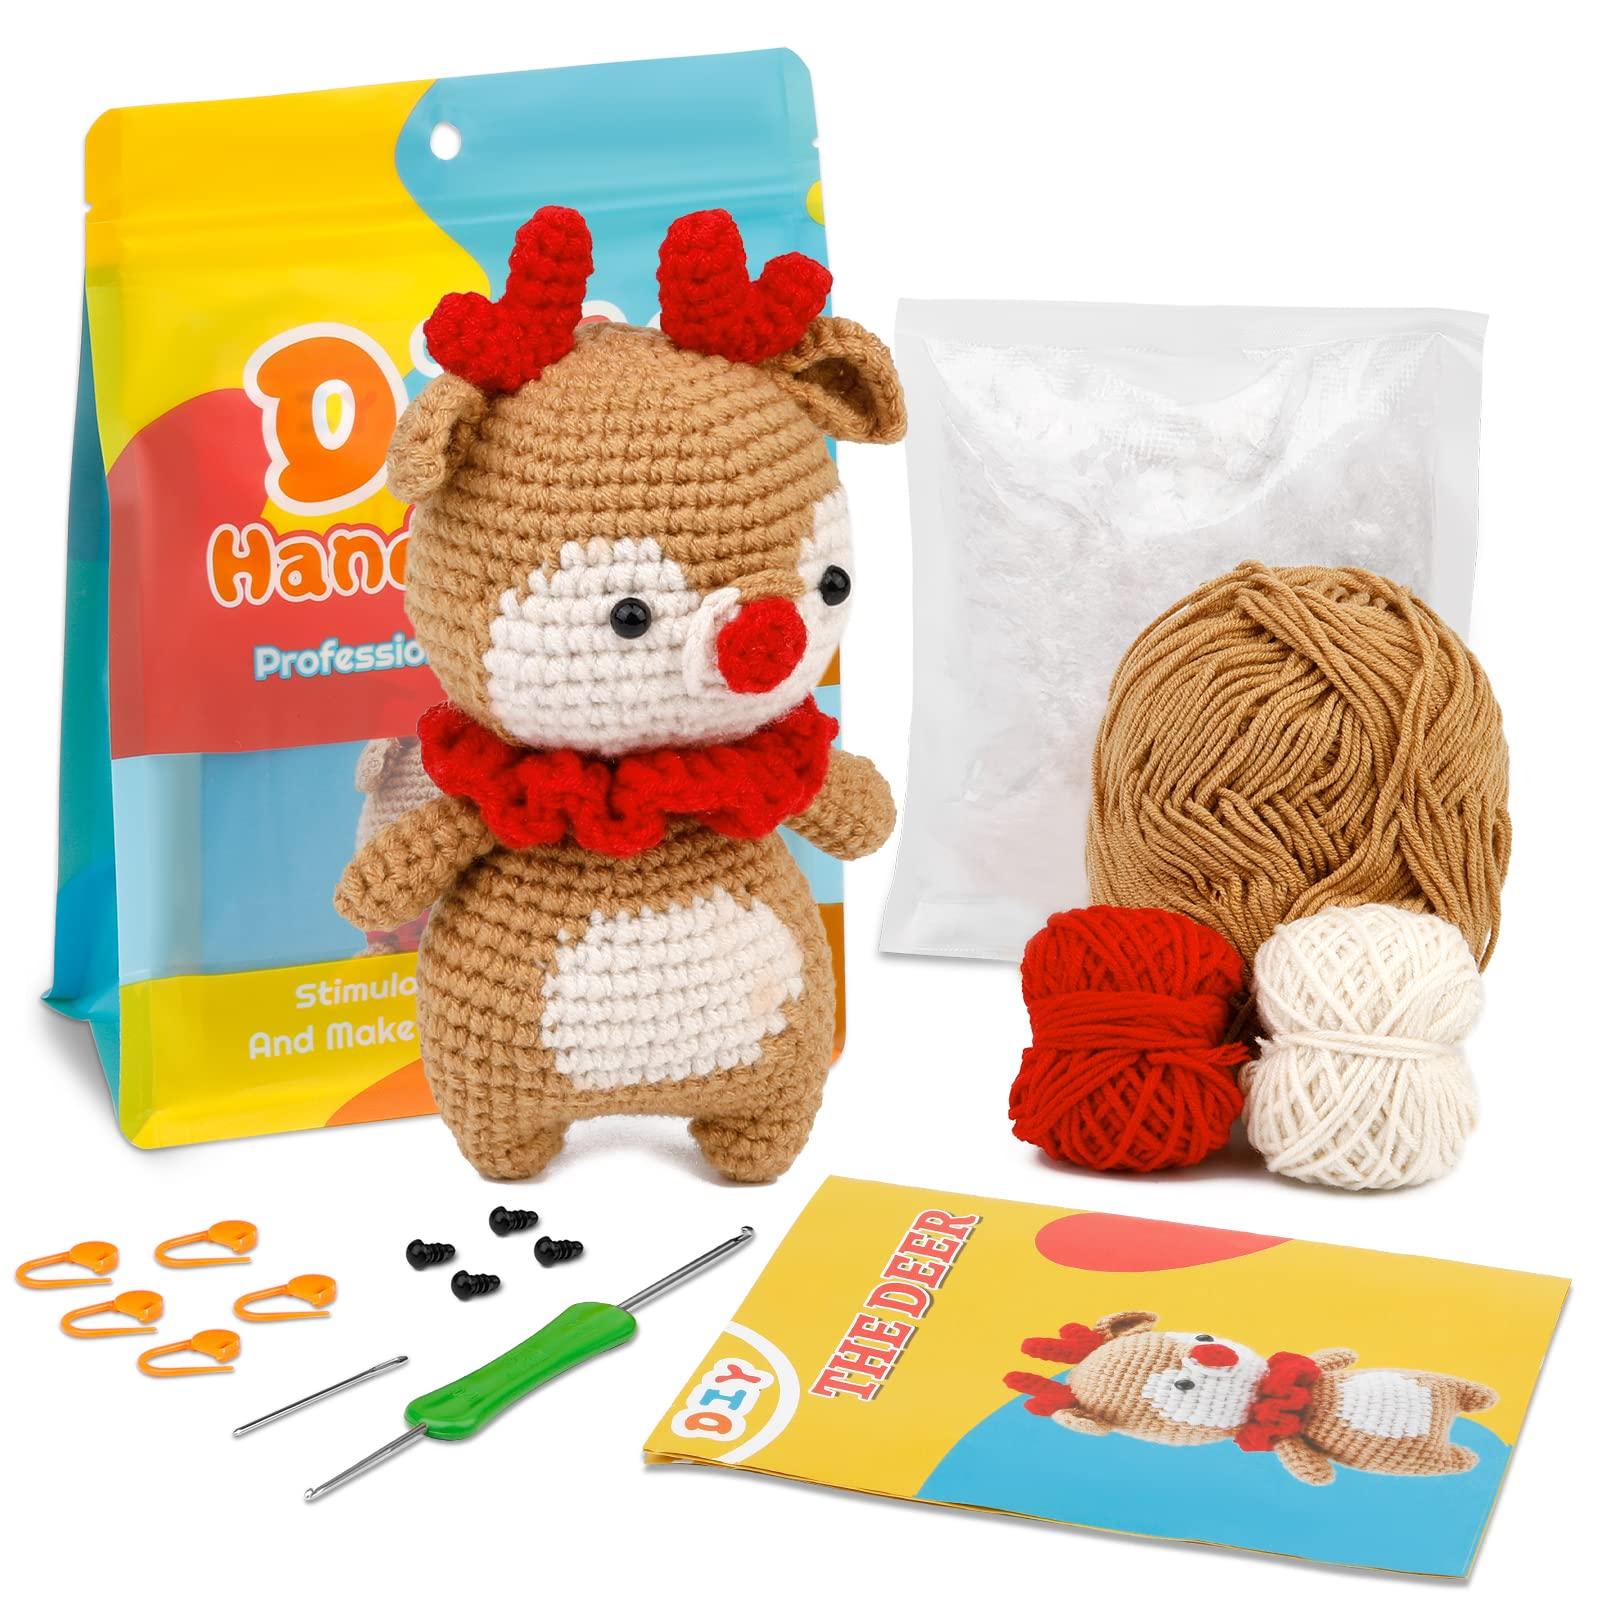 Christmas Crochet Kit for Beginners, Christmas Deer Beginner Crochet Kit  for Adults, Crochet Kits, Knitting Kit with Step-by-Step Video Tutorials